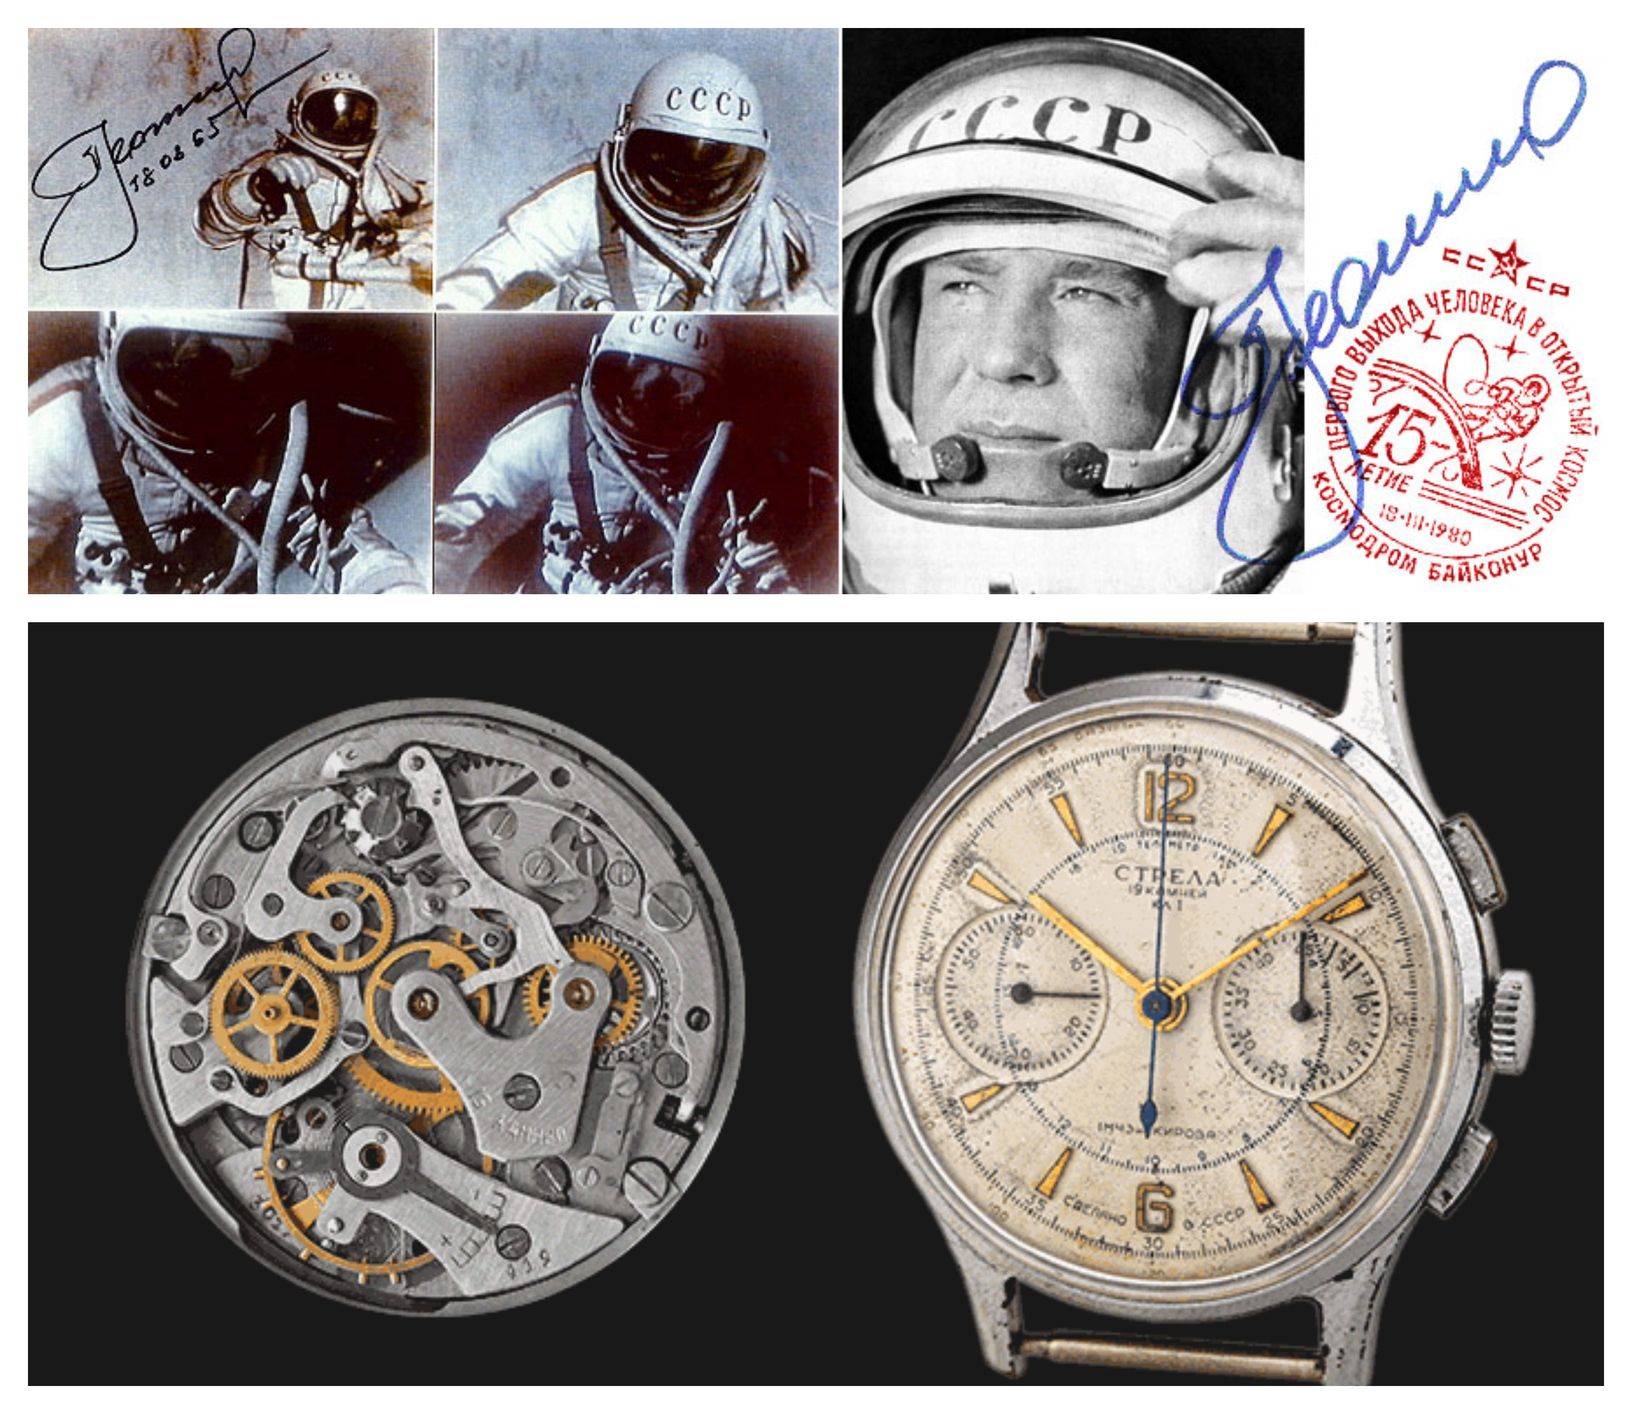 Leonov wore a Strela Chronograph watch with the Poljot 3017 hand-wound movement during his mission. Credits: STRELA